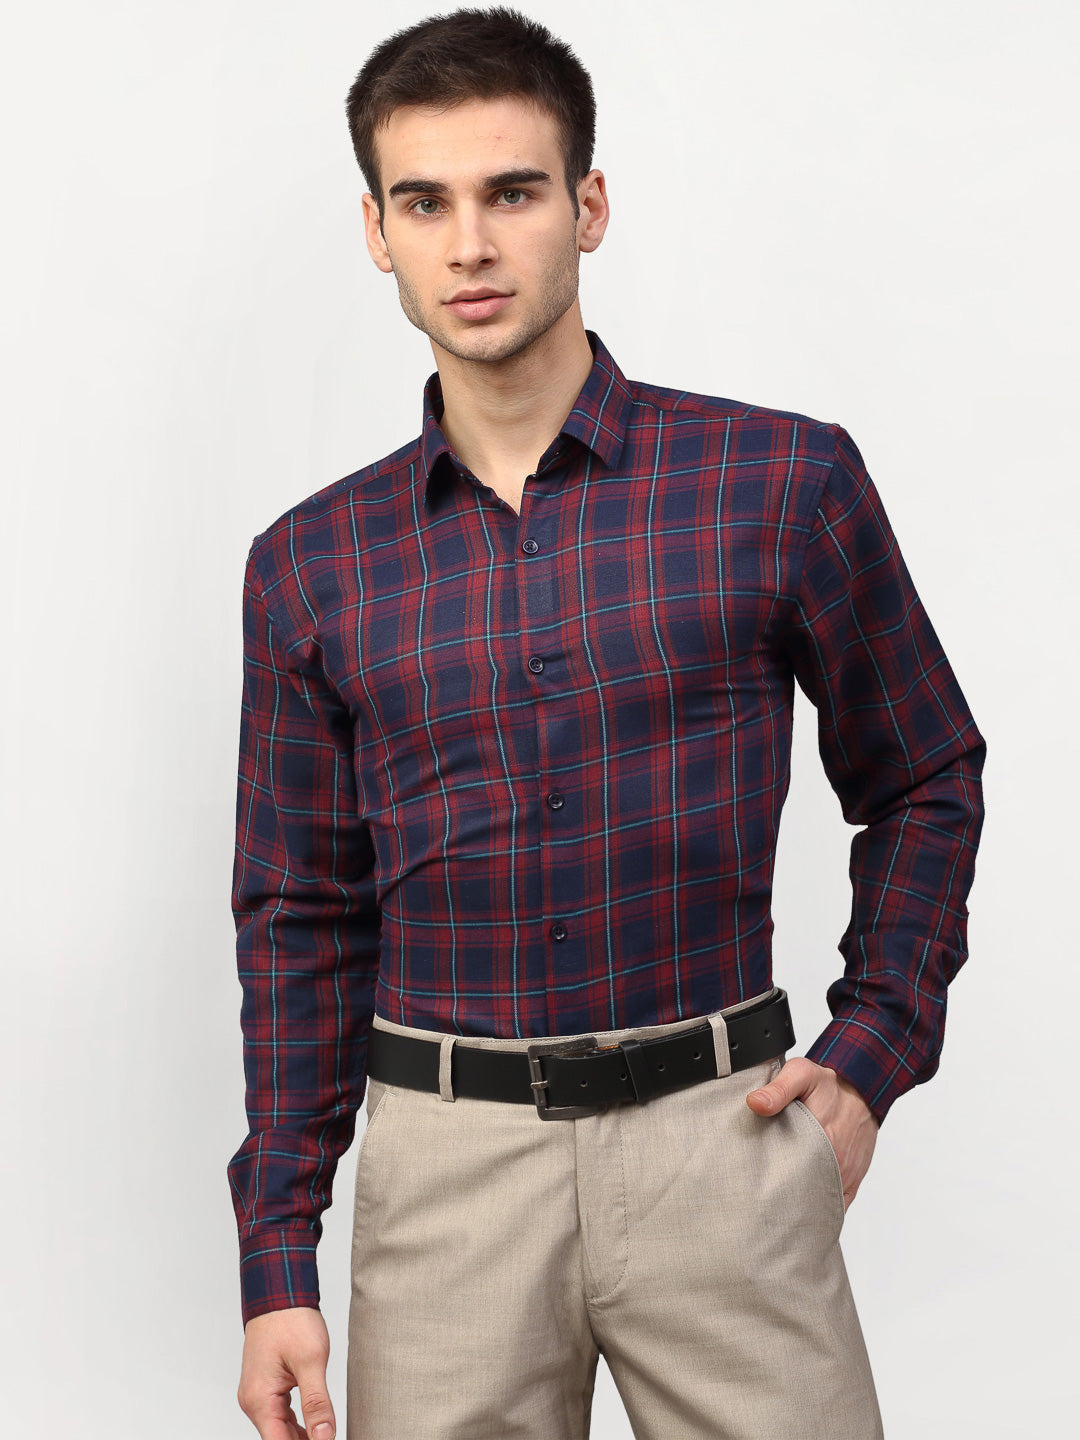 Men's Red Checked Formal Shirts ( SF 781Red-Blue ) - Jainish